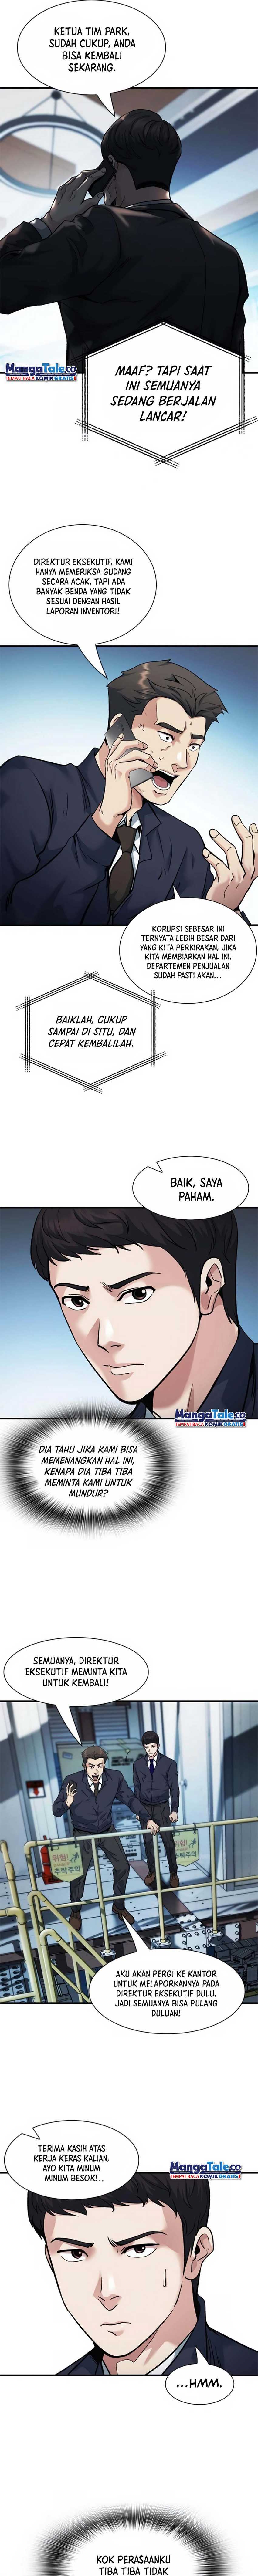 Chairman Kang, The New Employee Chapter 08